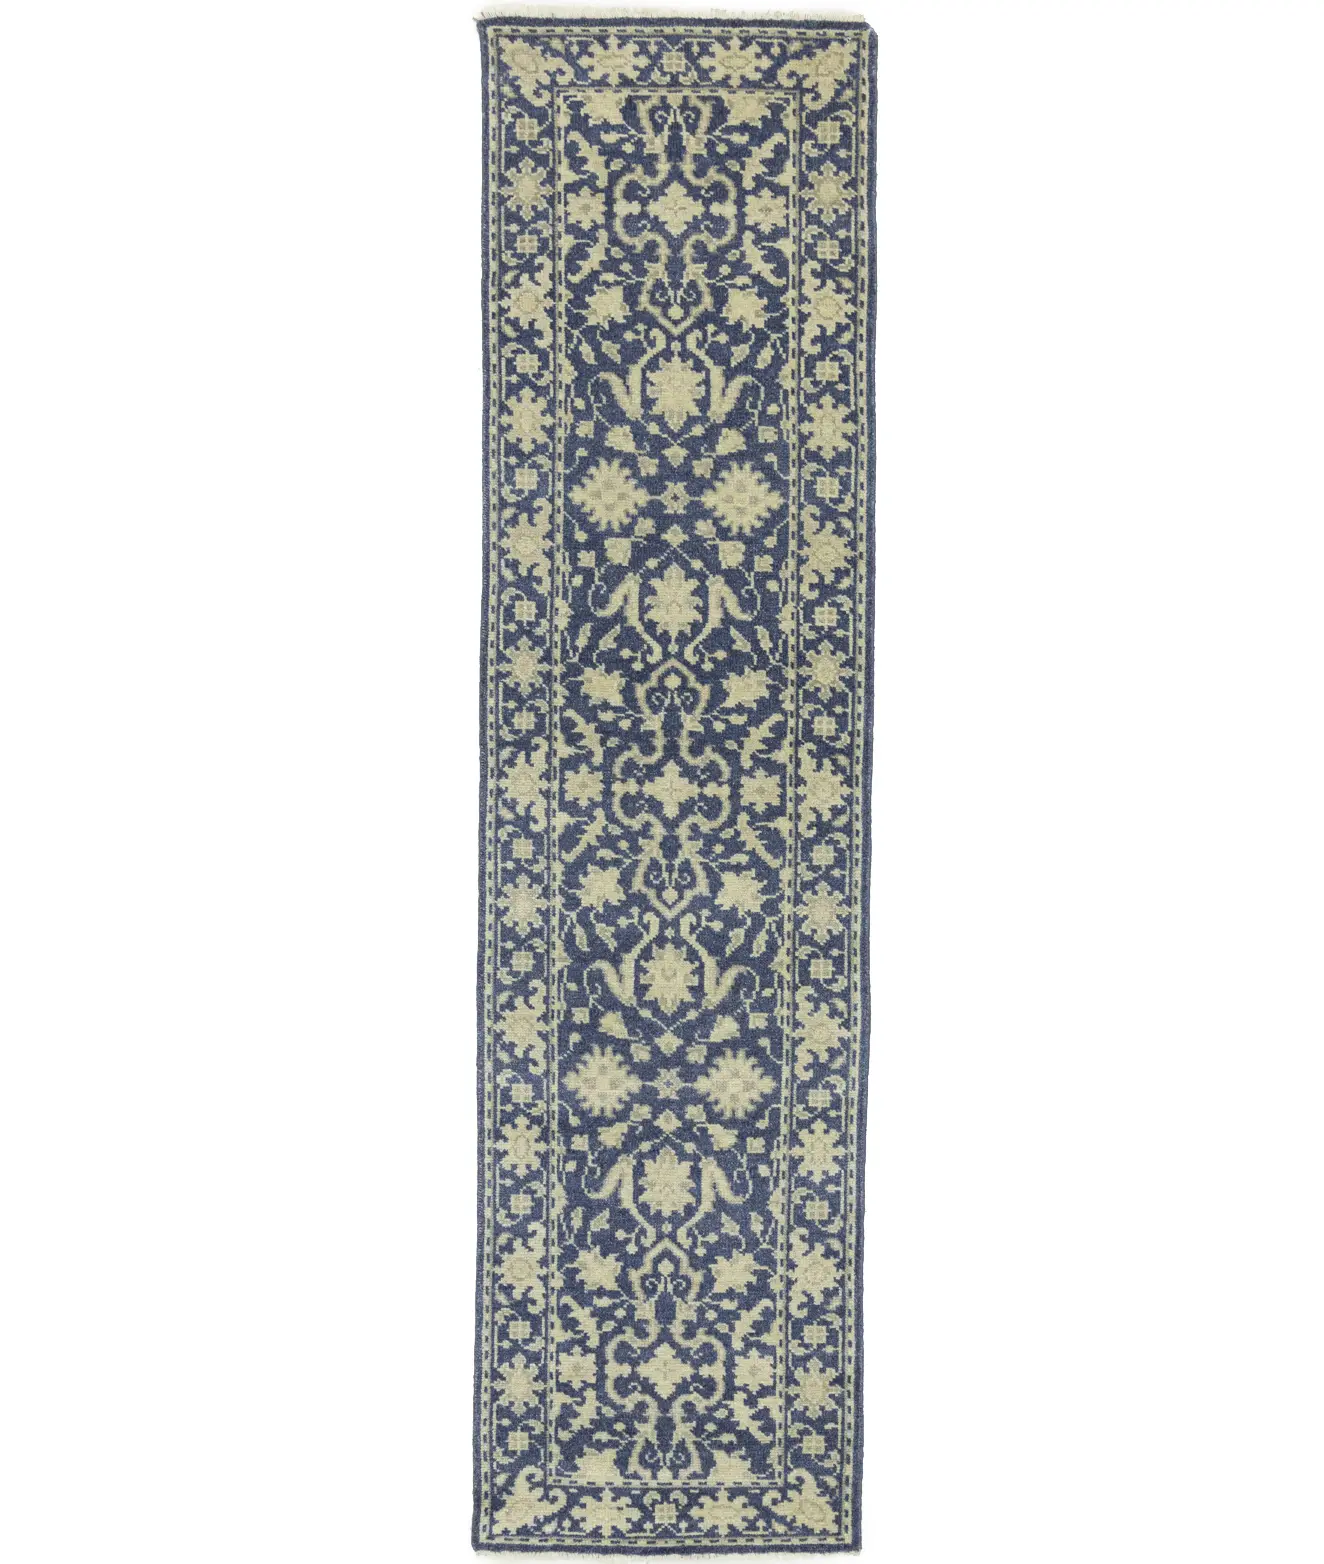 Muted Slate Blue Floral 2'6X9'9 Transitional Oriental Runner Rug